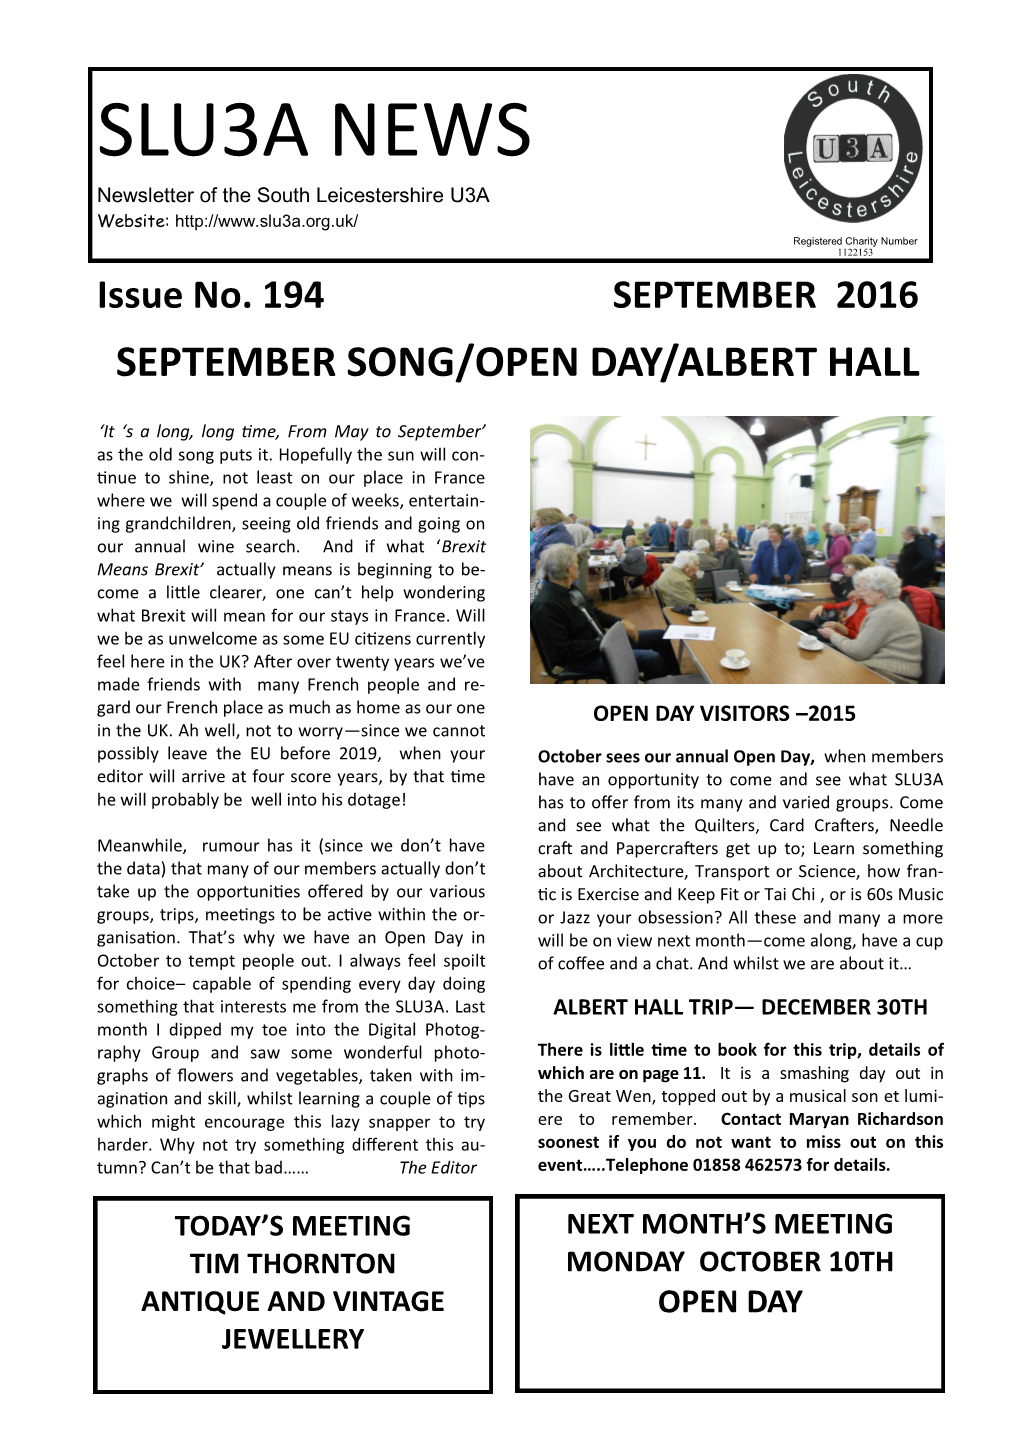 SLU3A NEWS Newsletter of the South Leicestershire U3A Website: Registered Charity Number 1122153 Issue No